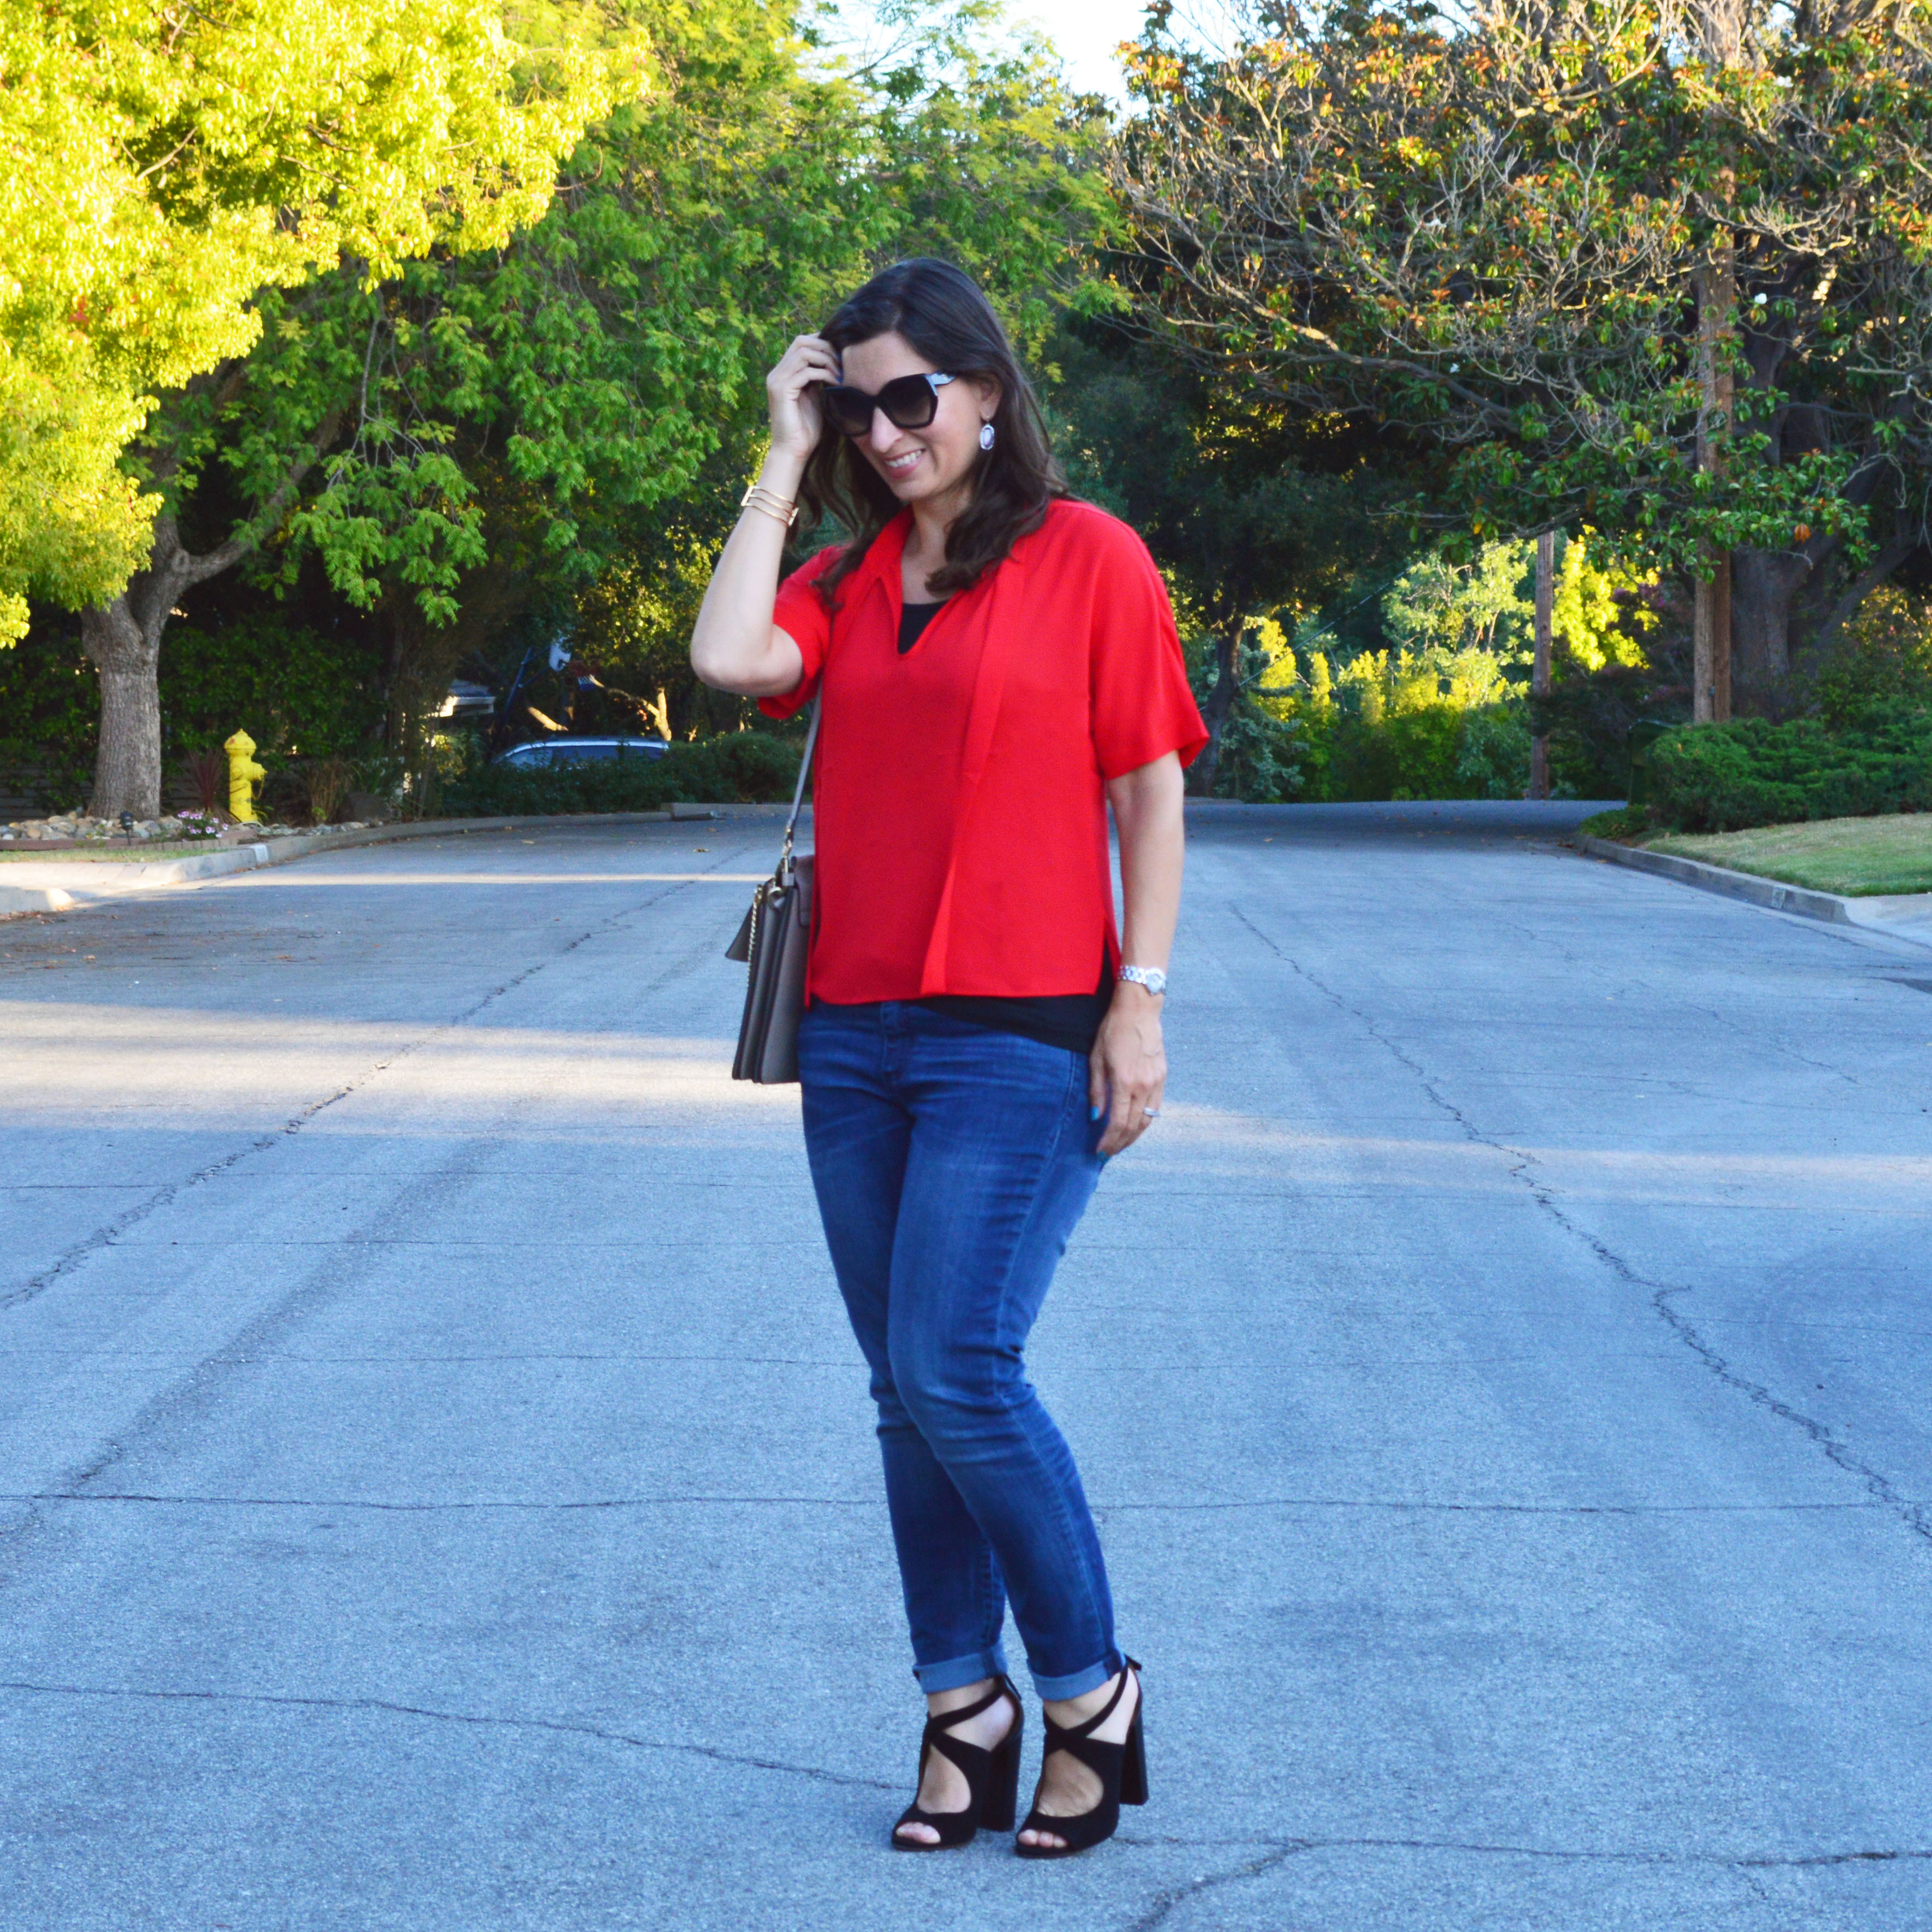 Classic casual outfit and pop of turquoise – Bay Area Fashionista